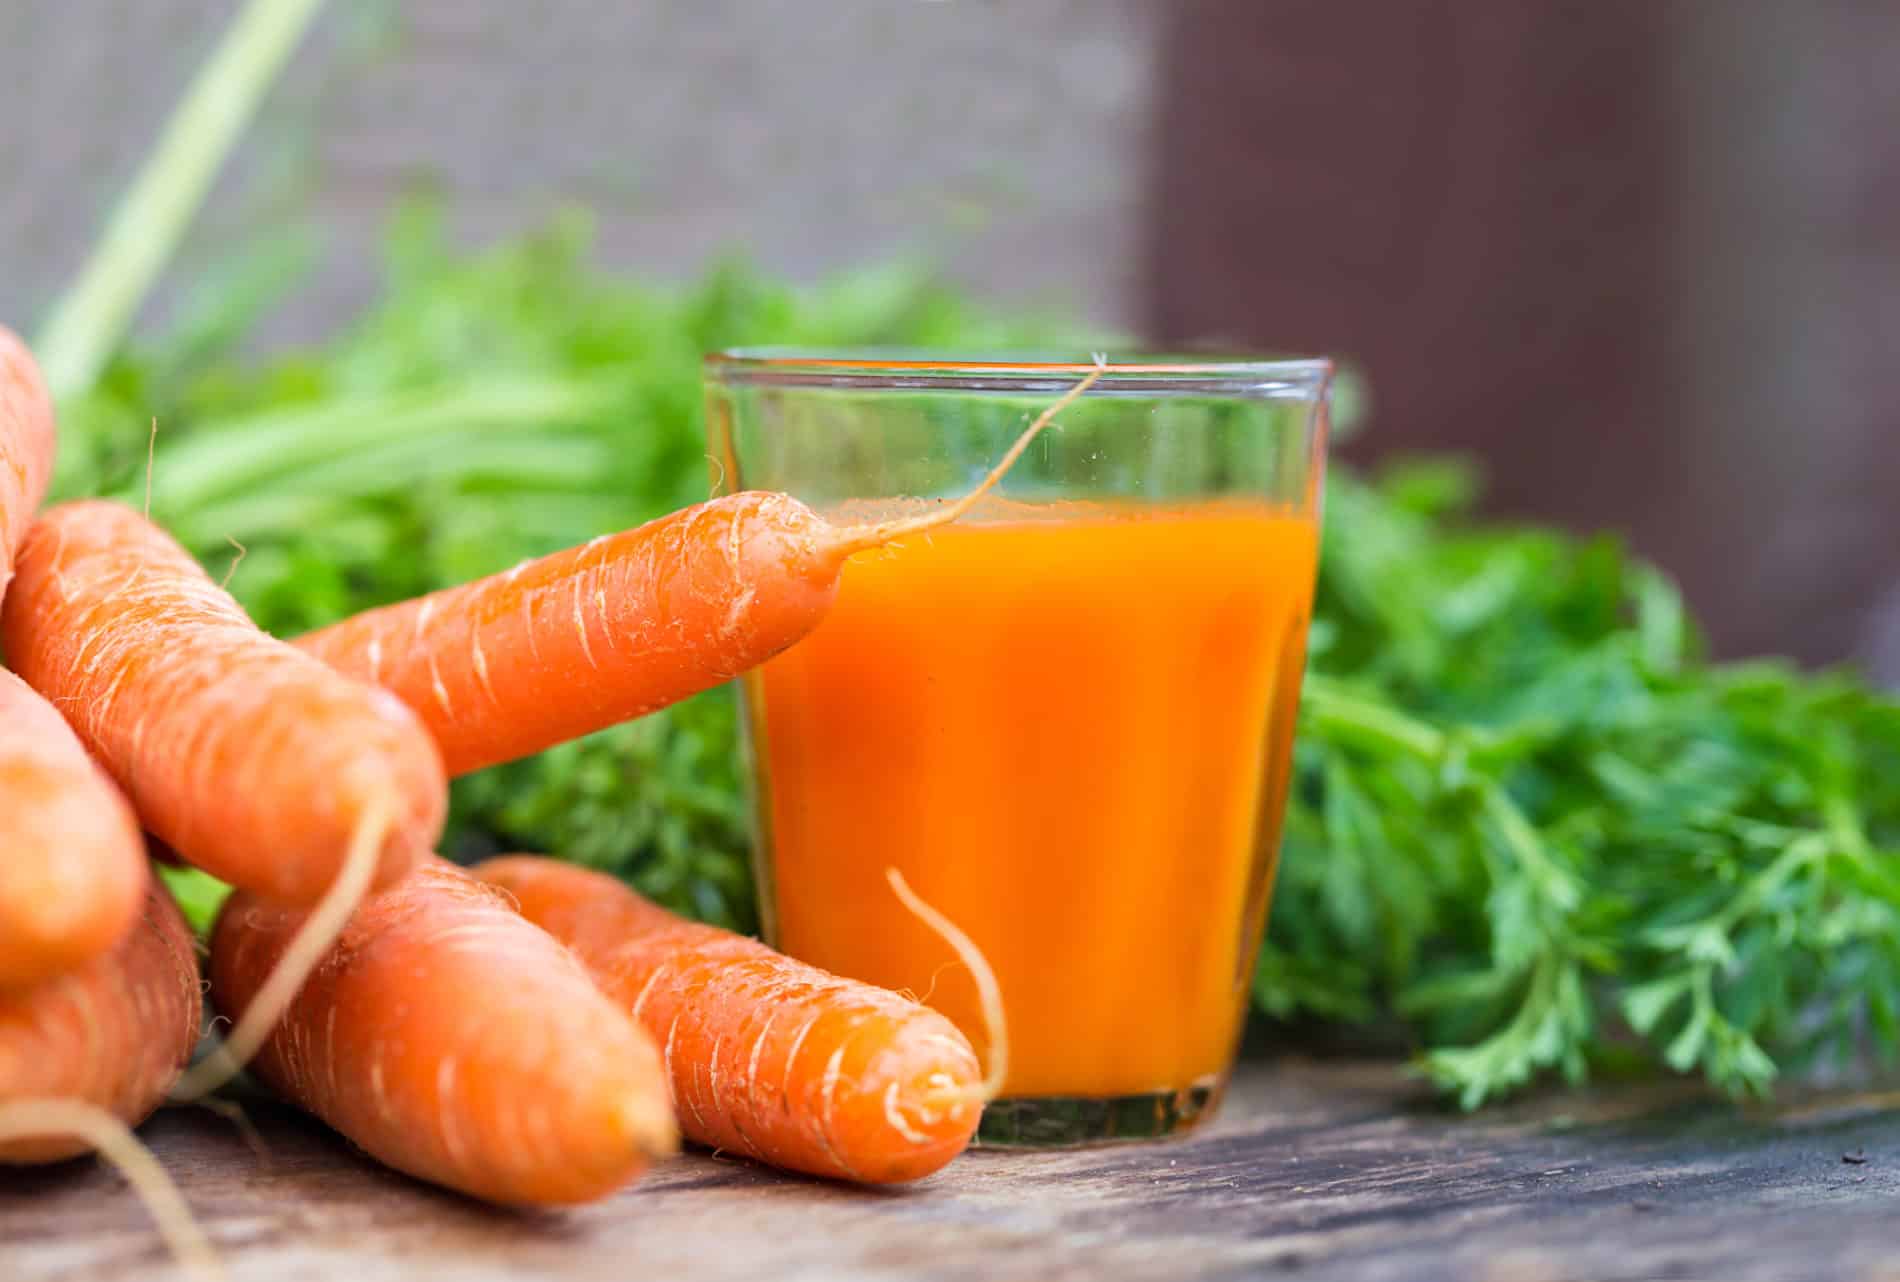 Make Natural Carrot Juice Without A Blender Typical Of Pasuruan City